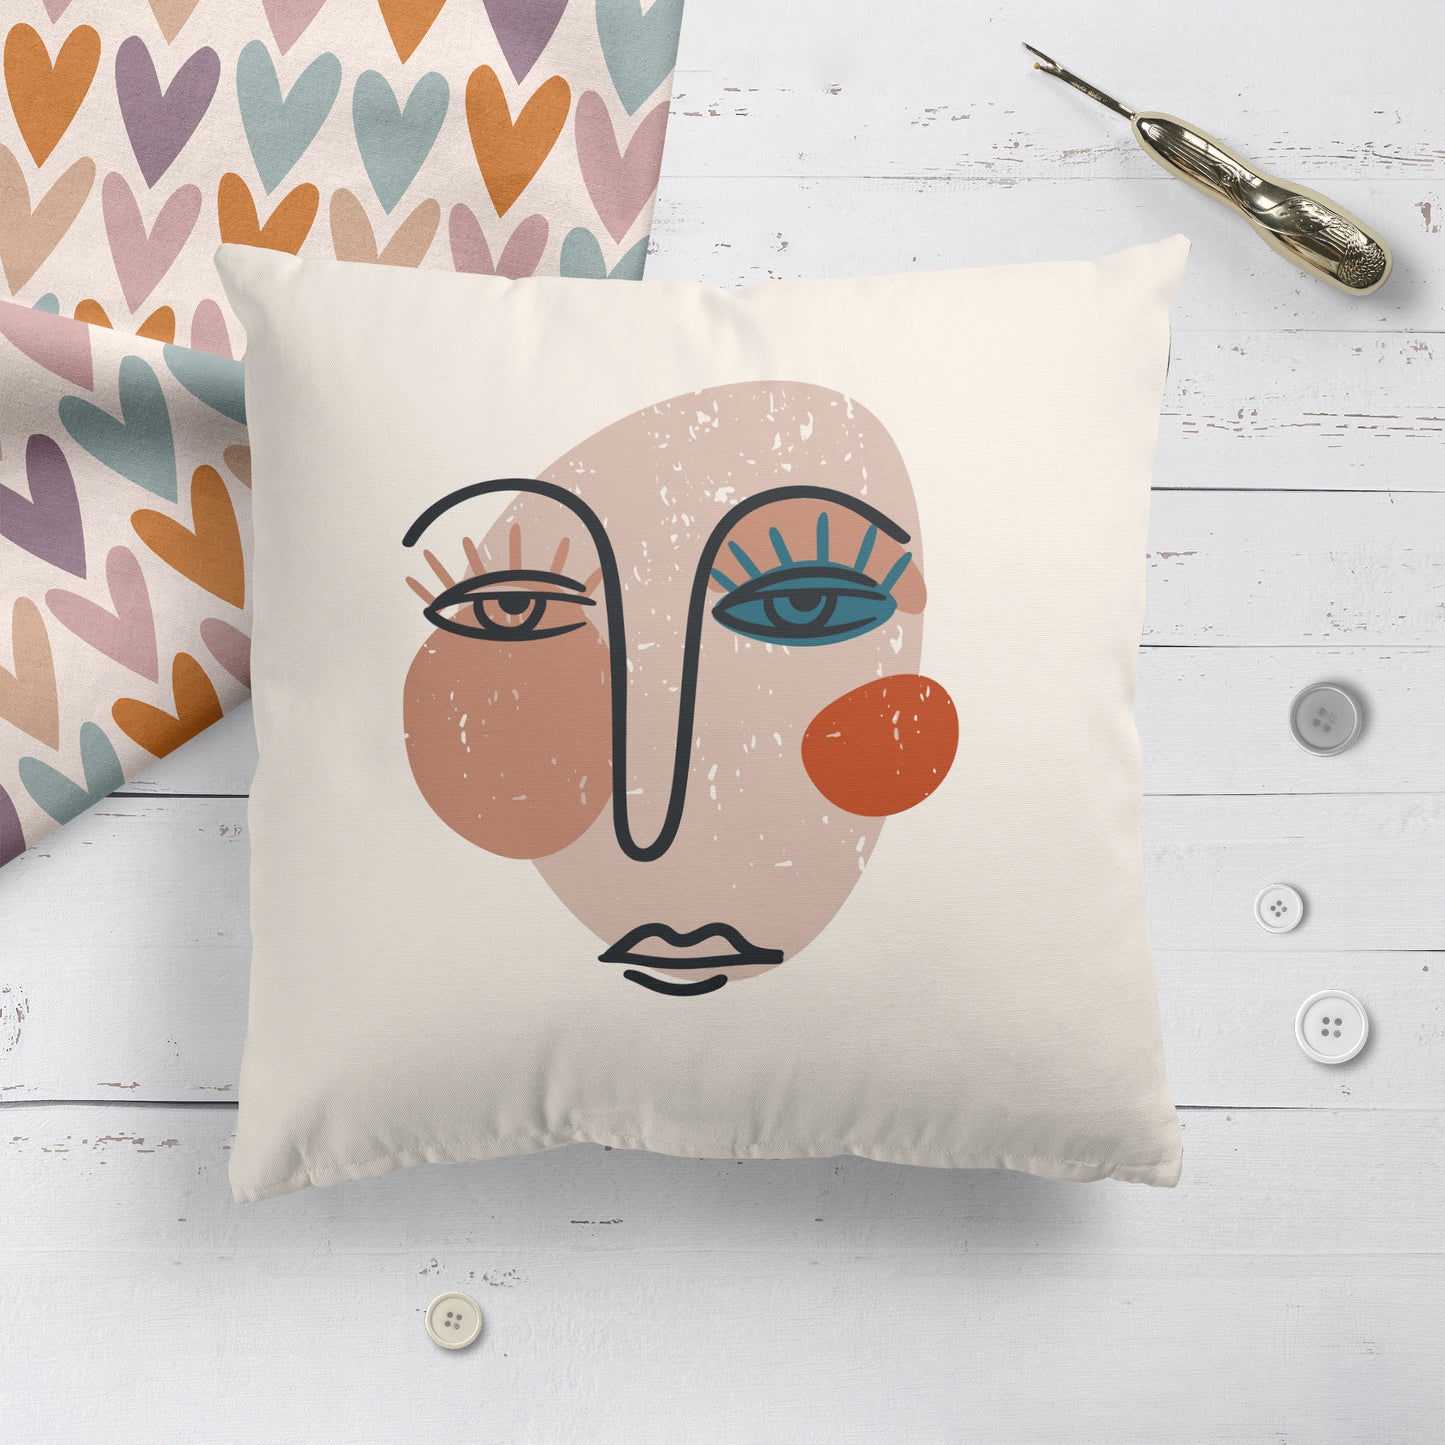 Picasso Inspired Pillow